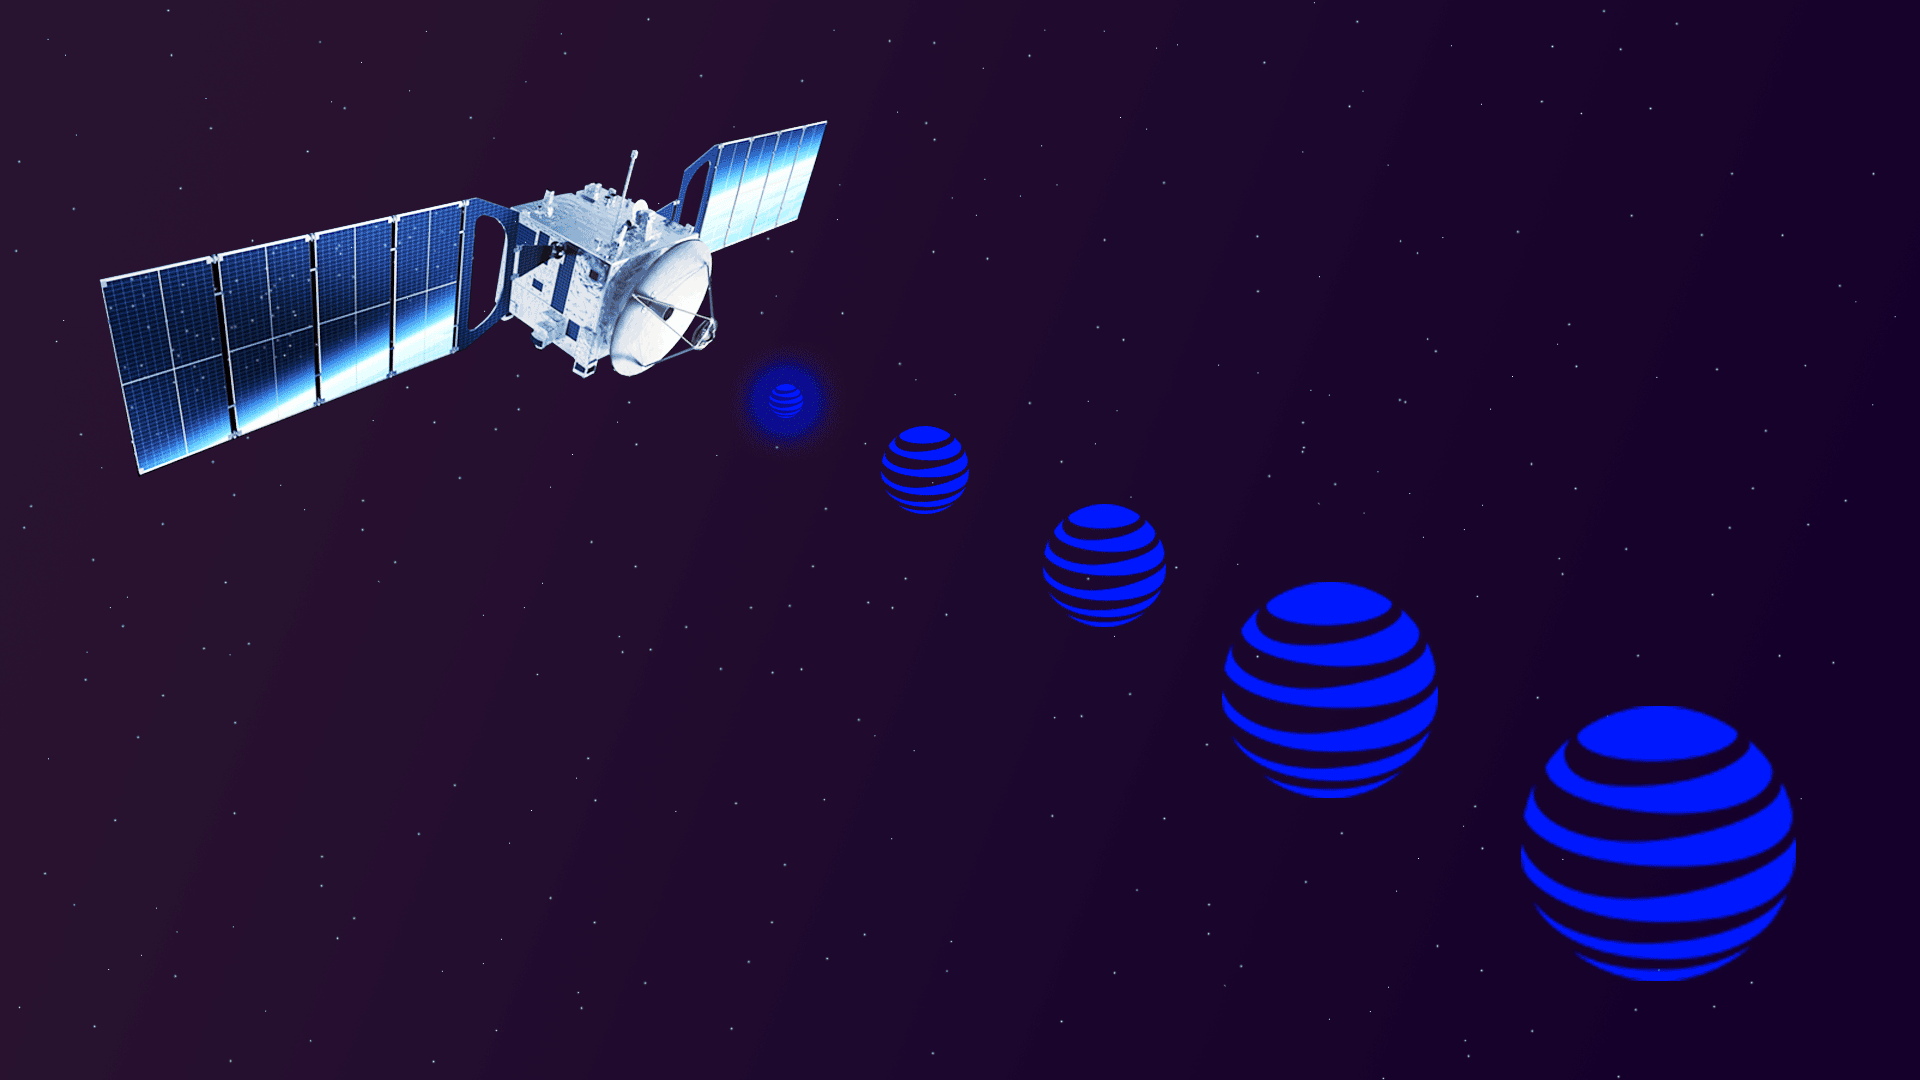 A satellite spitting out AT&T logos